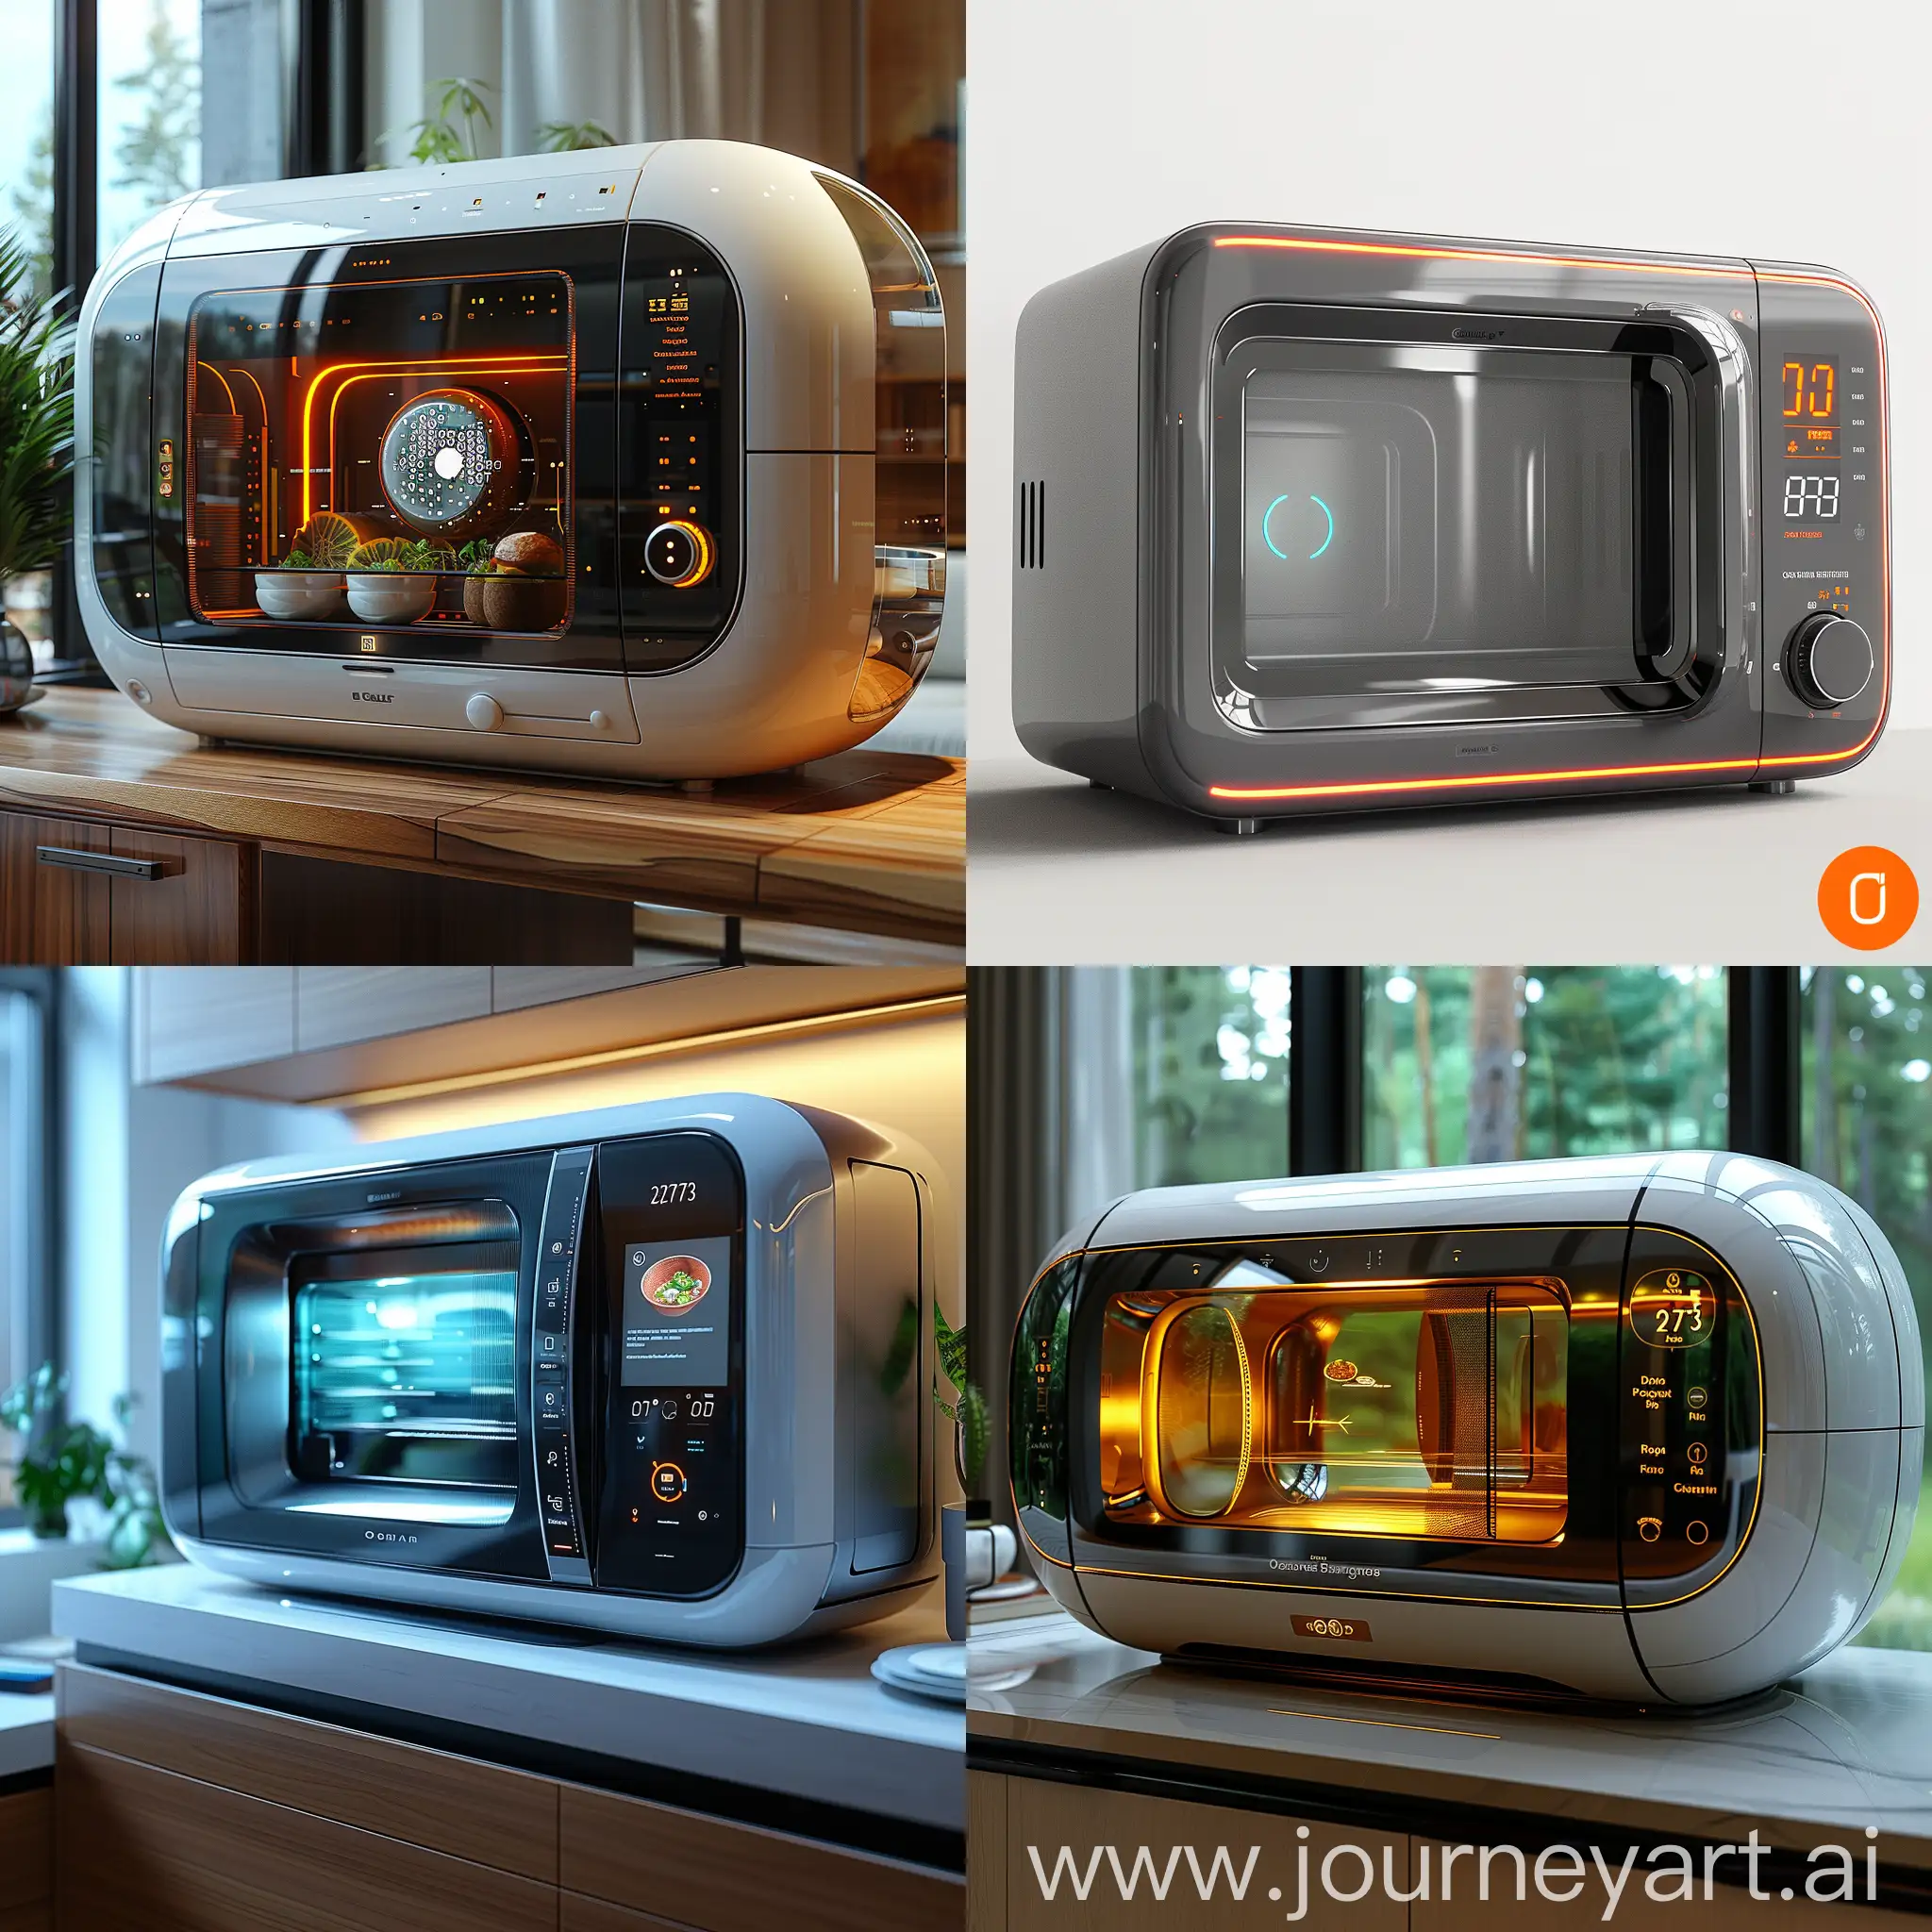 Futuristic Microwave, 2473, Sleek Design, AI Chef, Molecular Reconstruction, Nutrient Preservation, Voice Control, holographic Recipe Projection, Self-Cleaning, octane render --stylize 1000